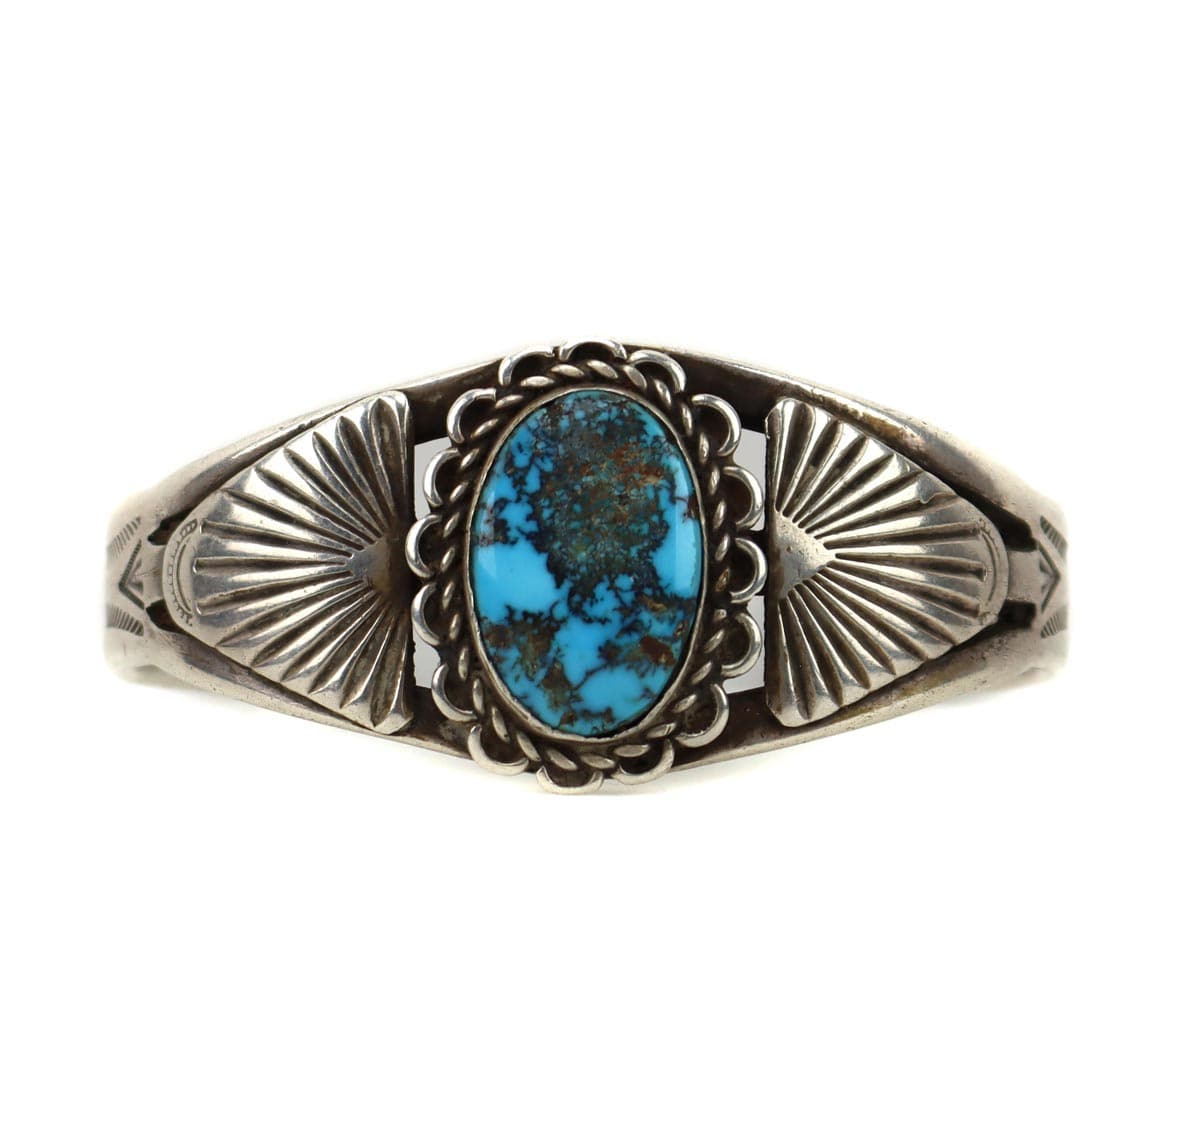 Navajo Turquoise and Silver Bracelet with Stamped Design c. 1940s, size 6.75 (J14853)

